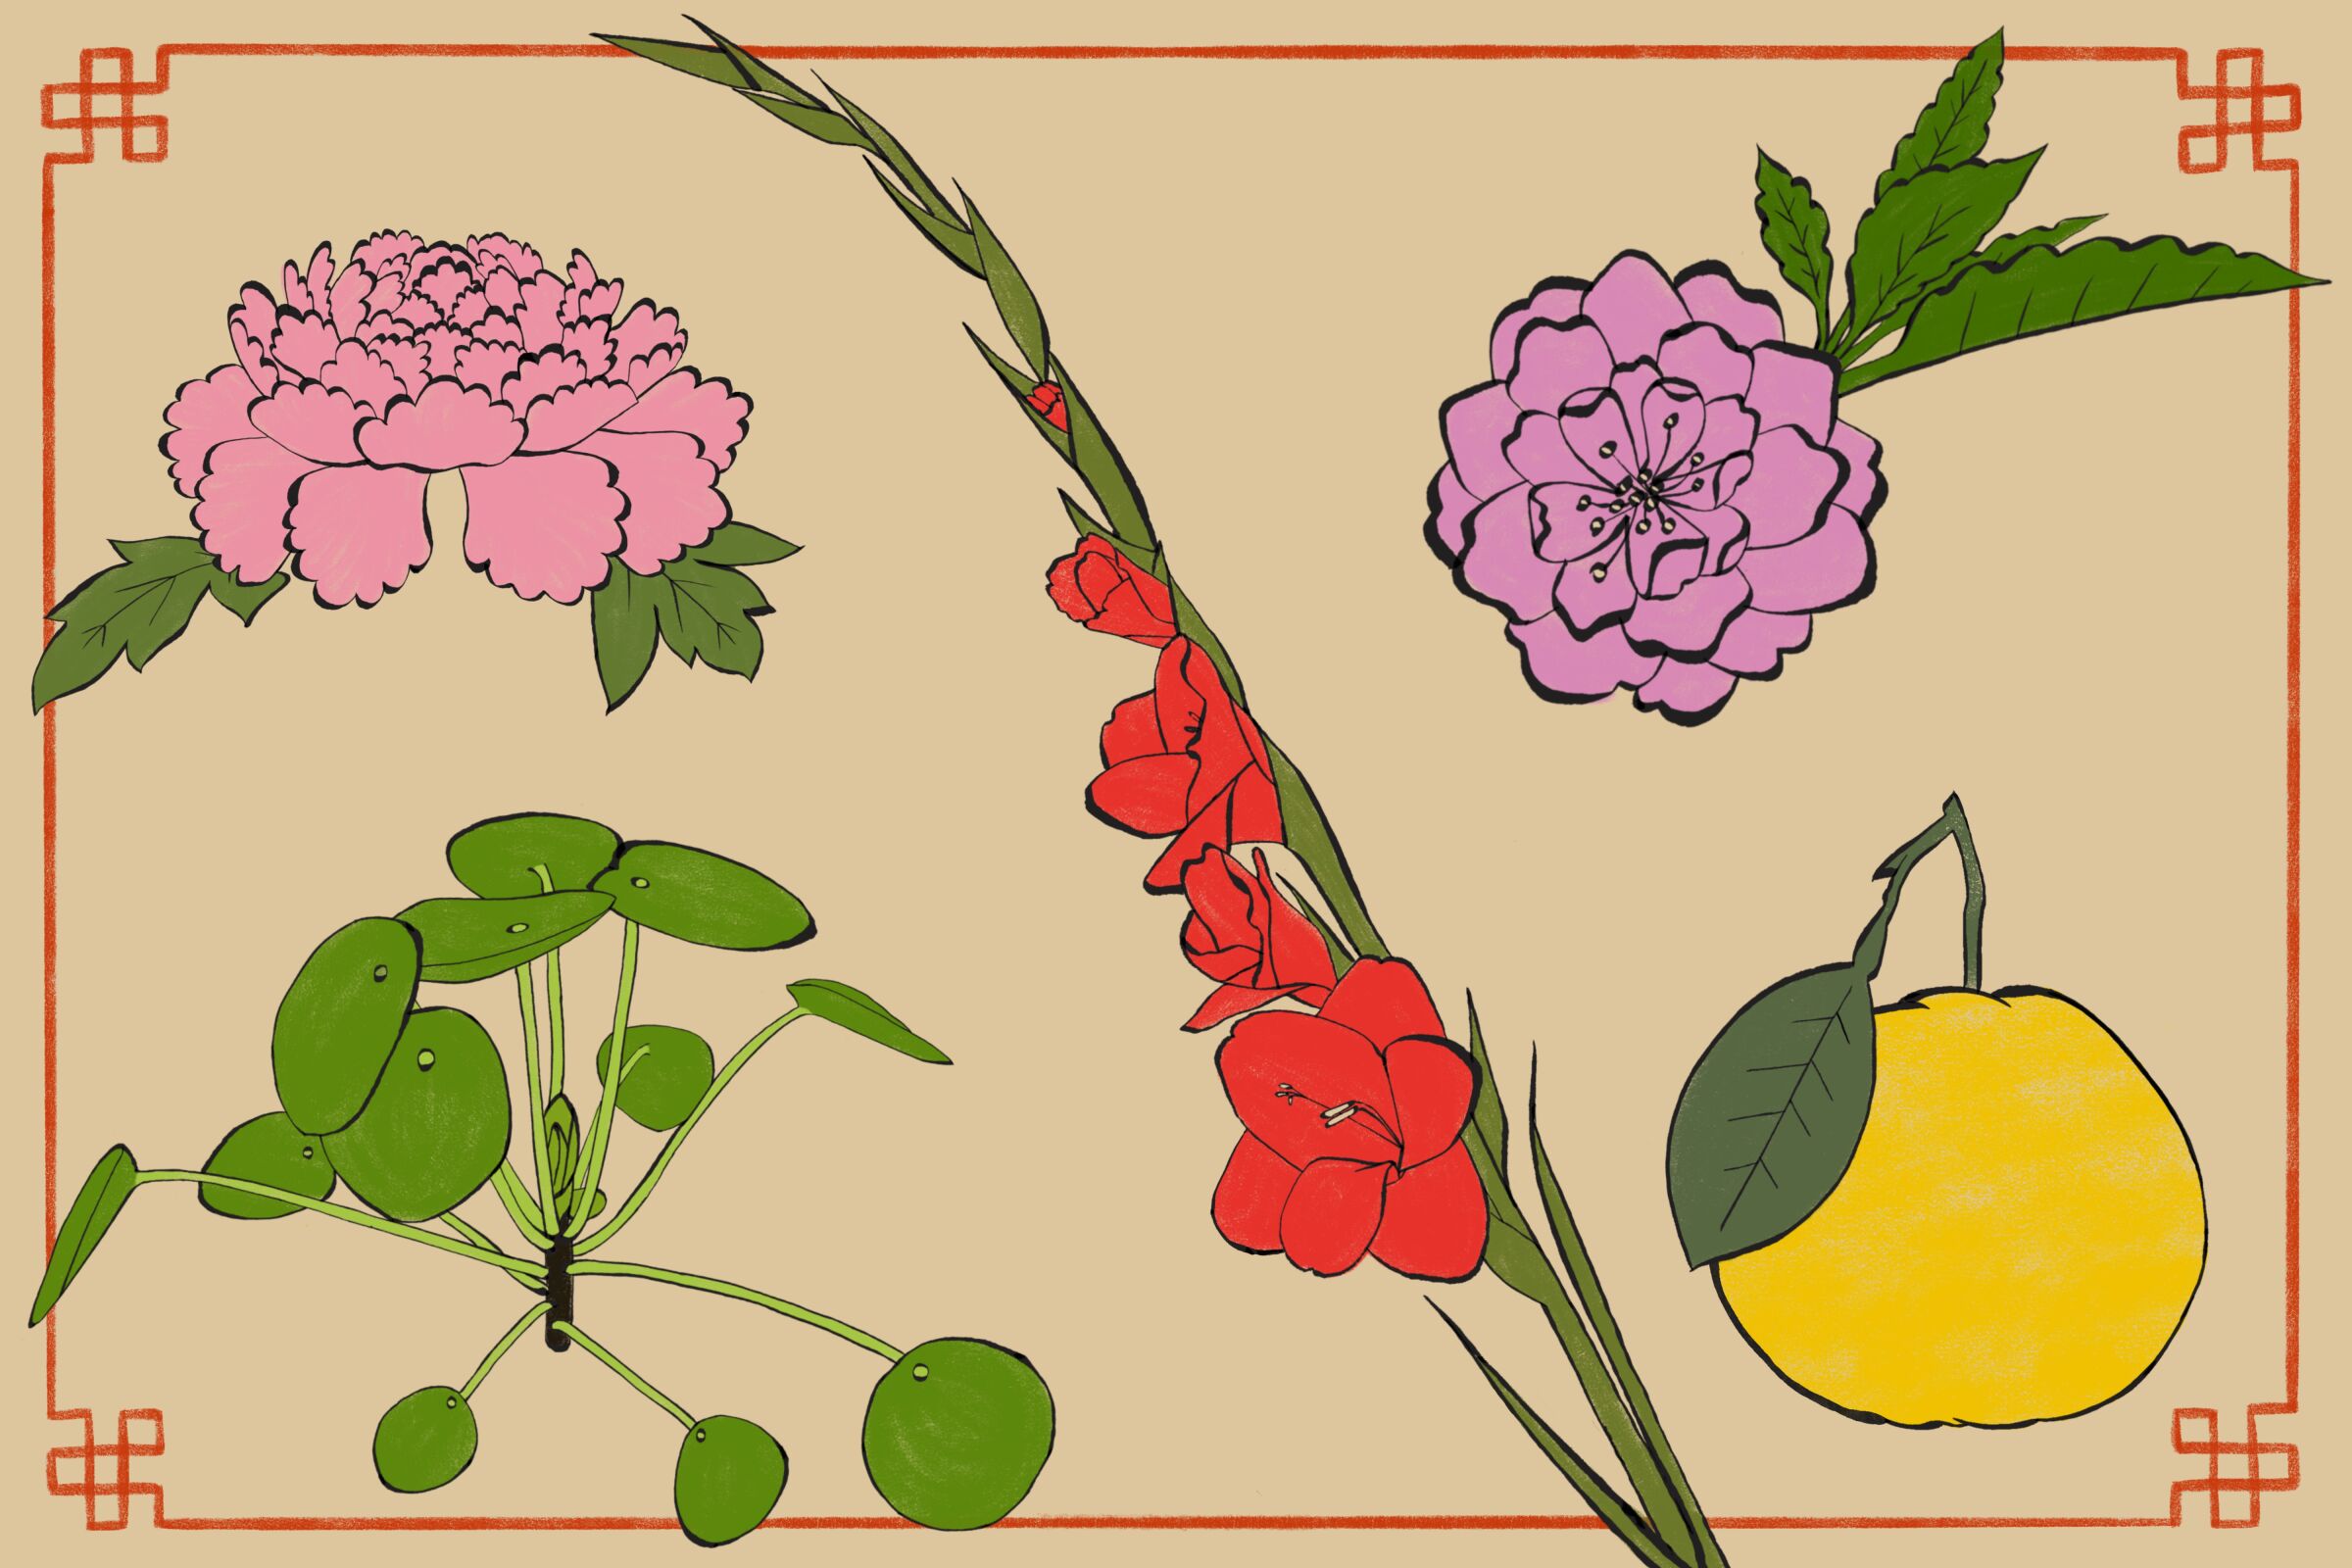 An illustration of pink and red flowers, a citrus fruit and a round-leaf plant